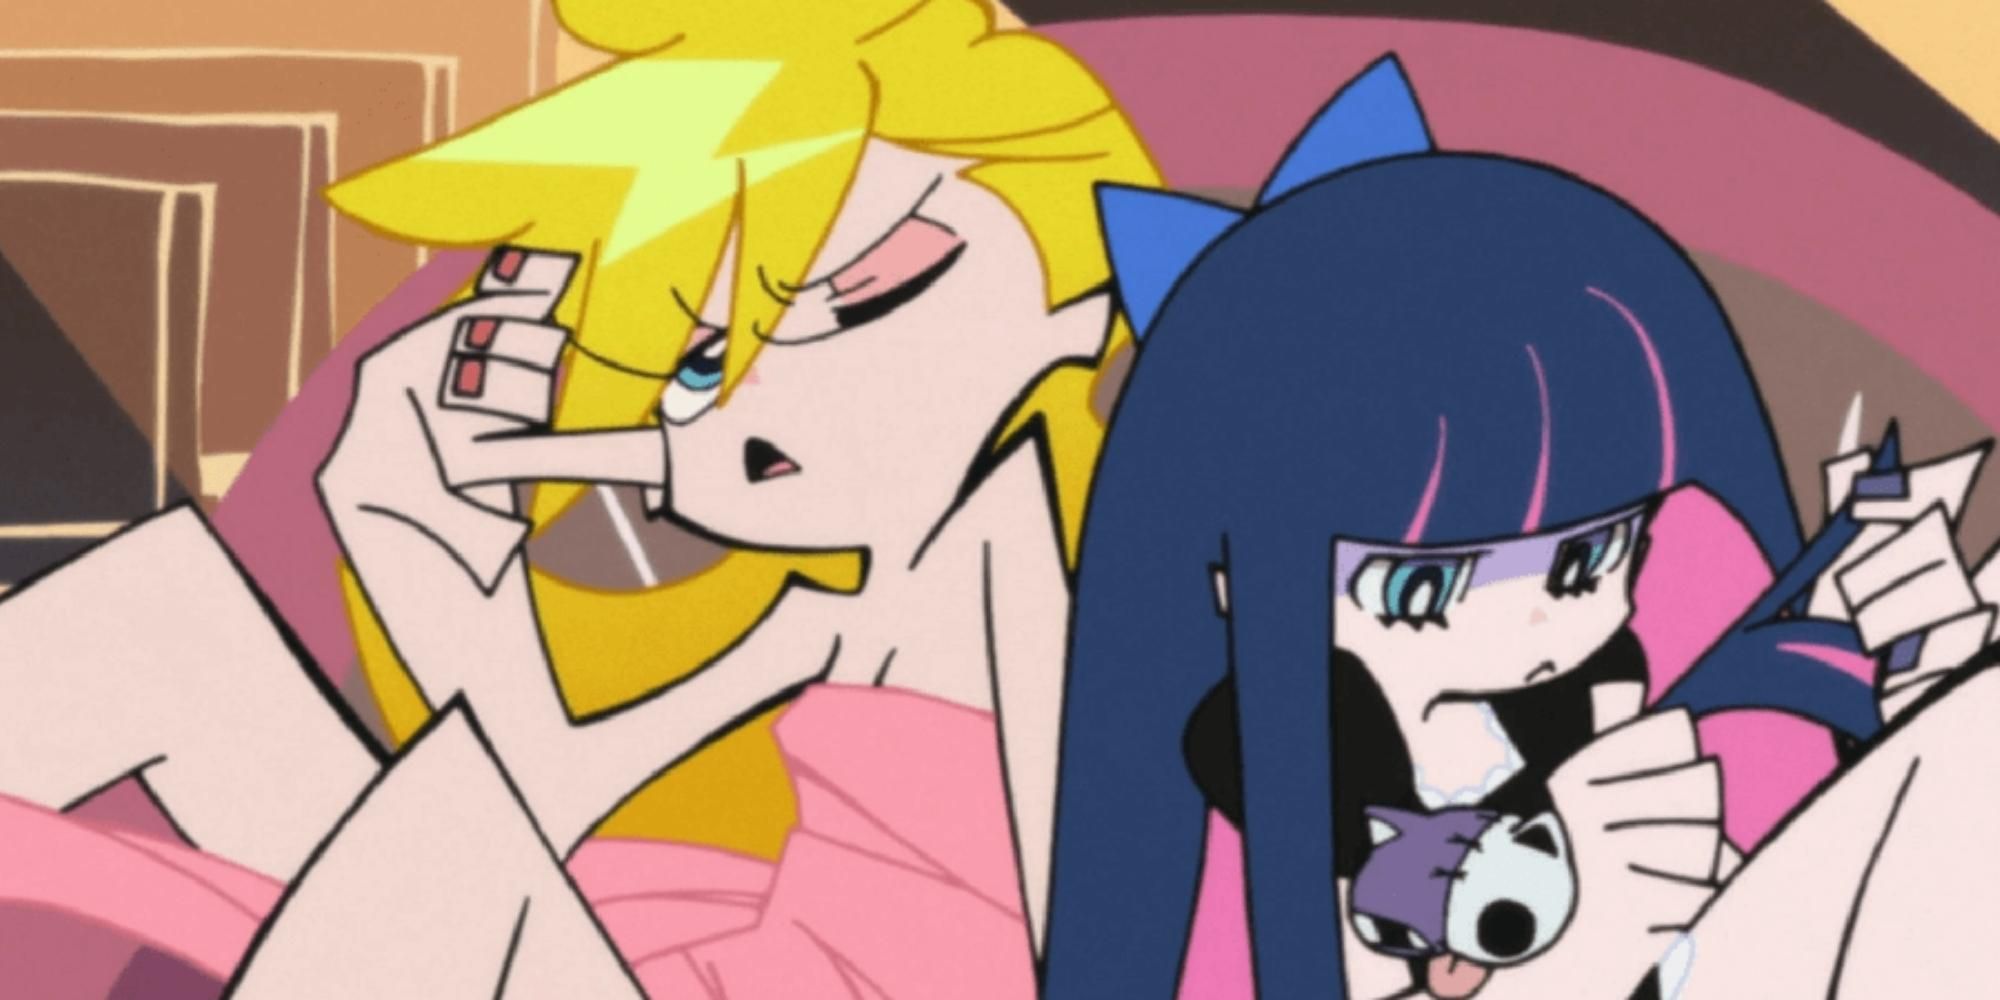 Panty and Stocking in Panty & Stocking With Garterbelt